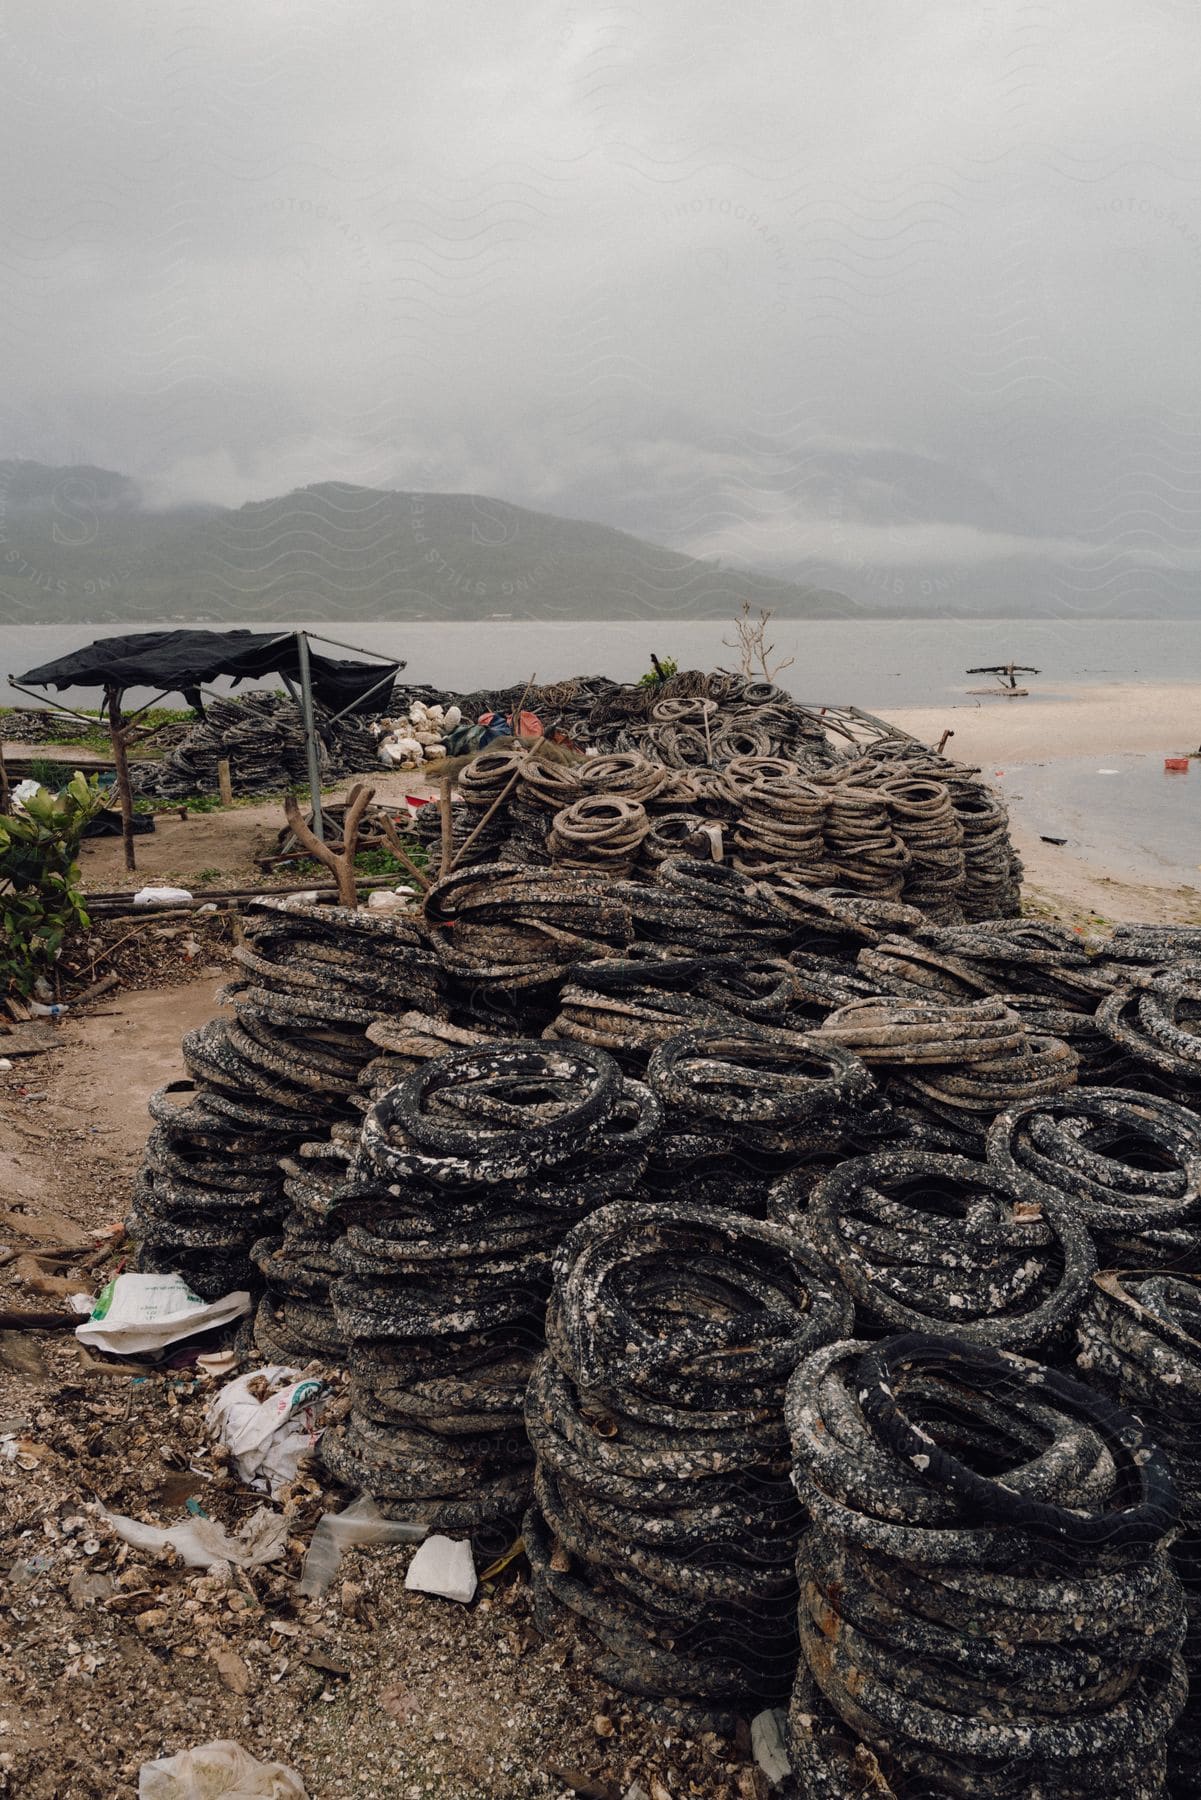 A polluted beach with a large pile of old, discarded tires covered in barnacles and other marine organisms.